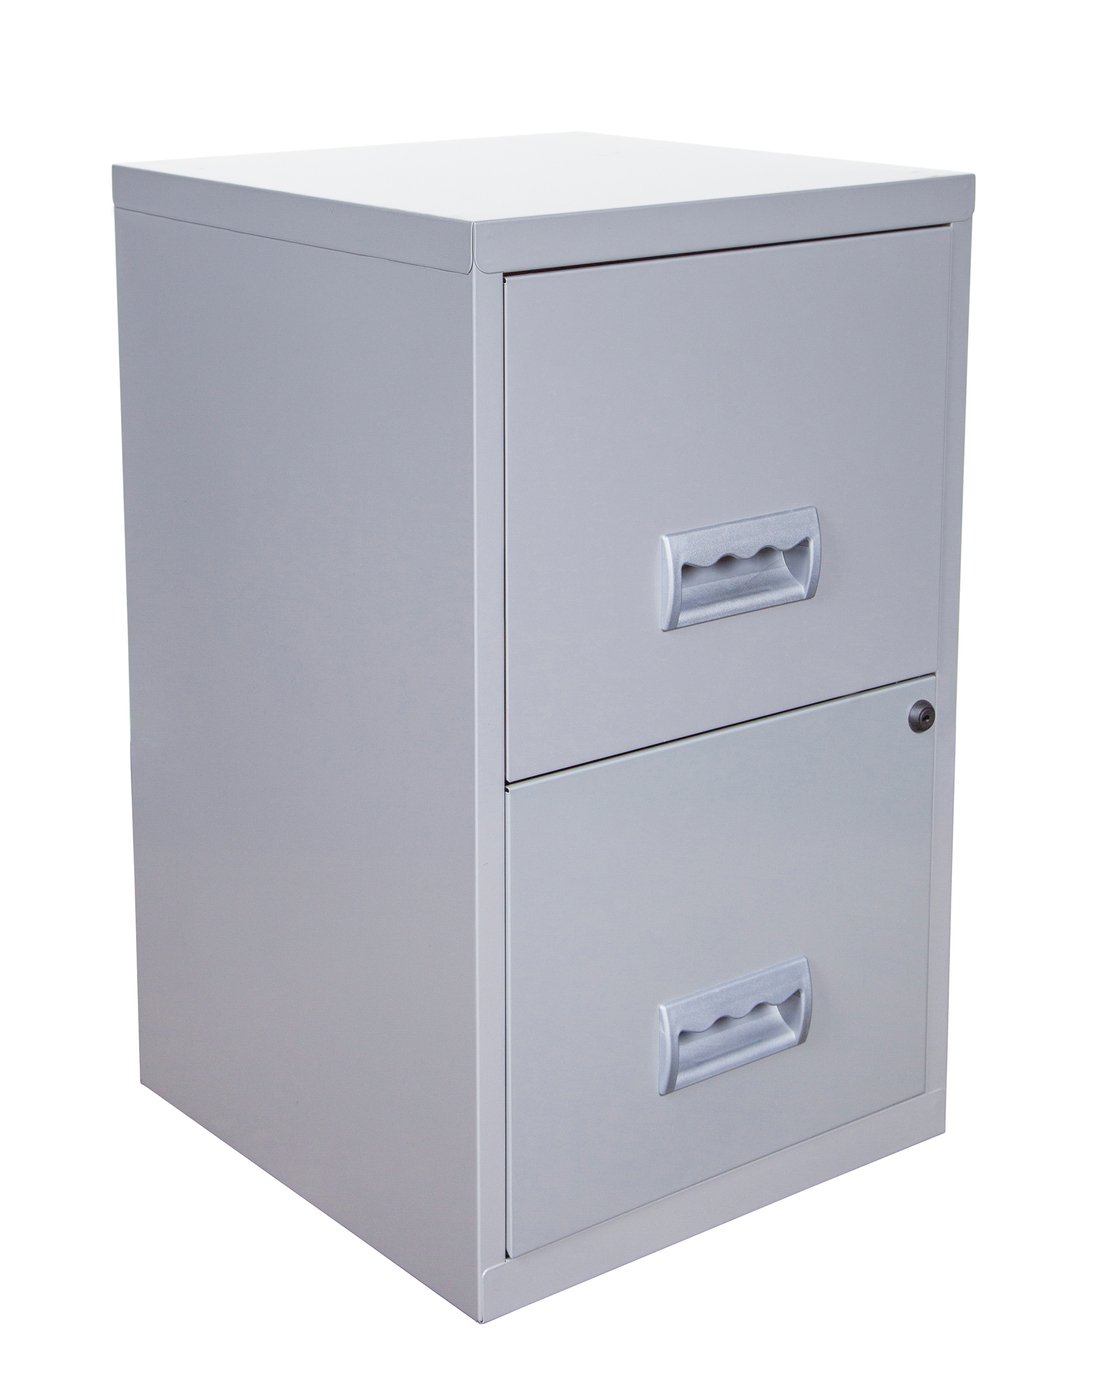 Piere Henry A4 2 Drawer Filing Cabinet - Silver